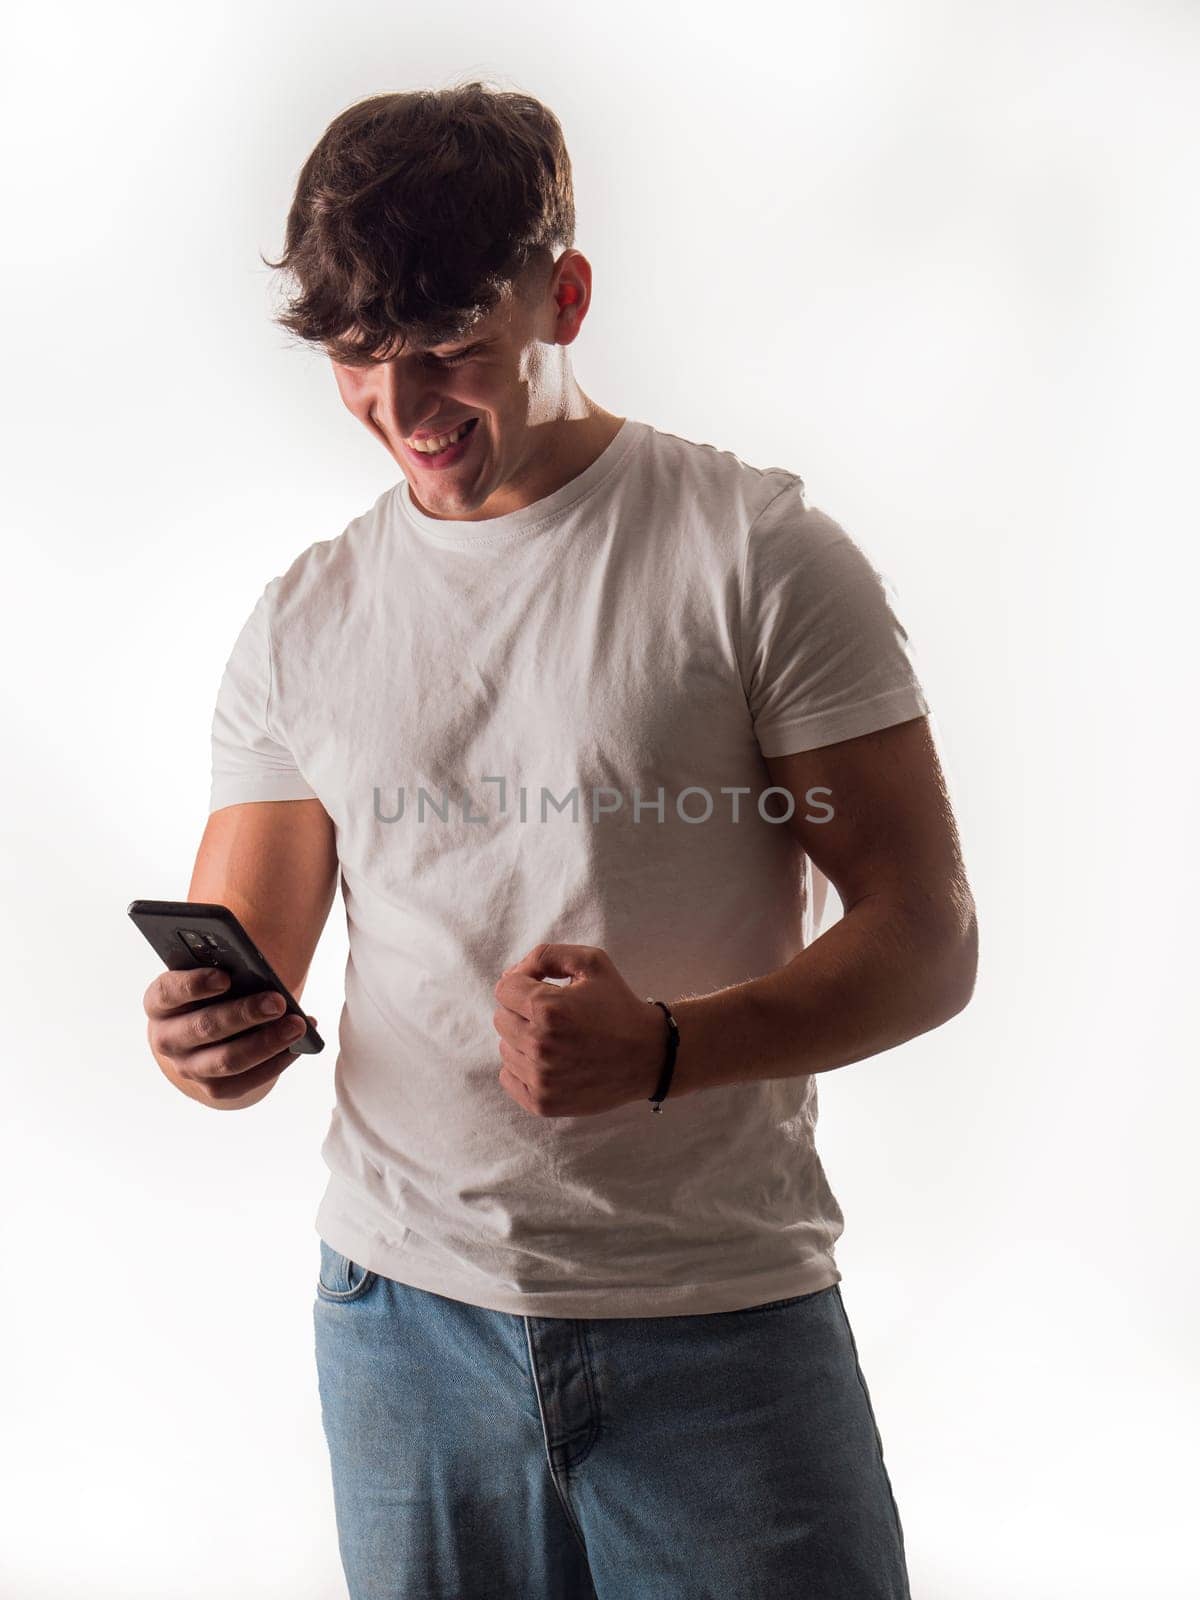 A man laughing while holding a cell phone. A Joyful Moment Captured: A Handsome Man Laughing With a Cell Phone in a Studio Setting